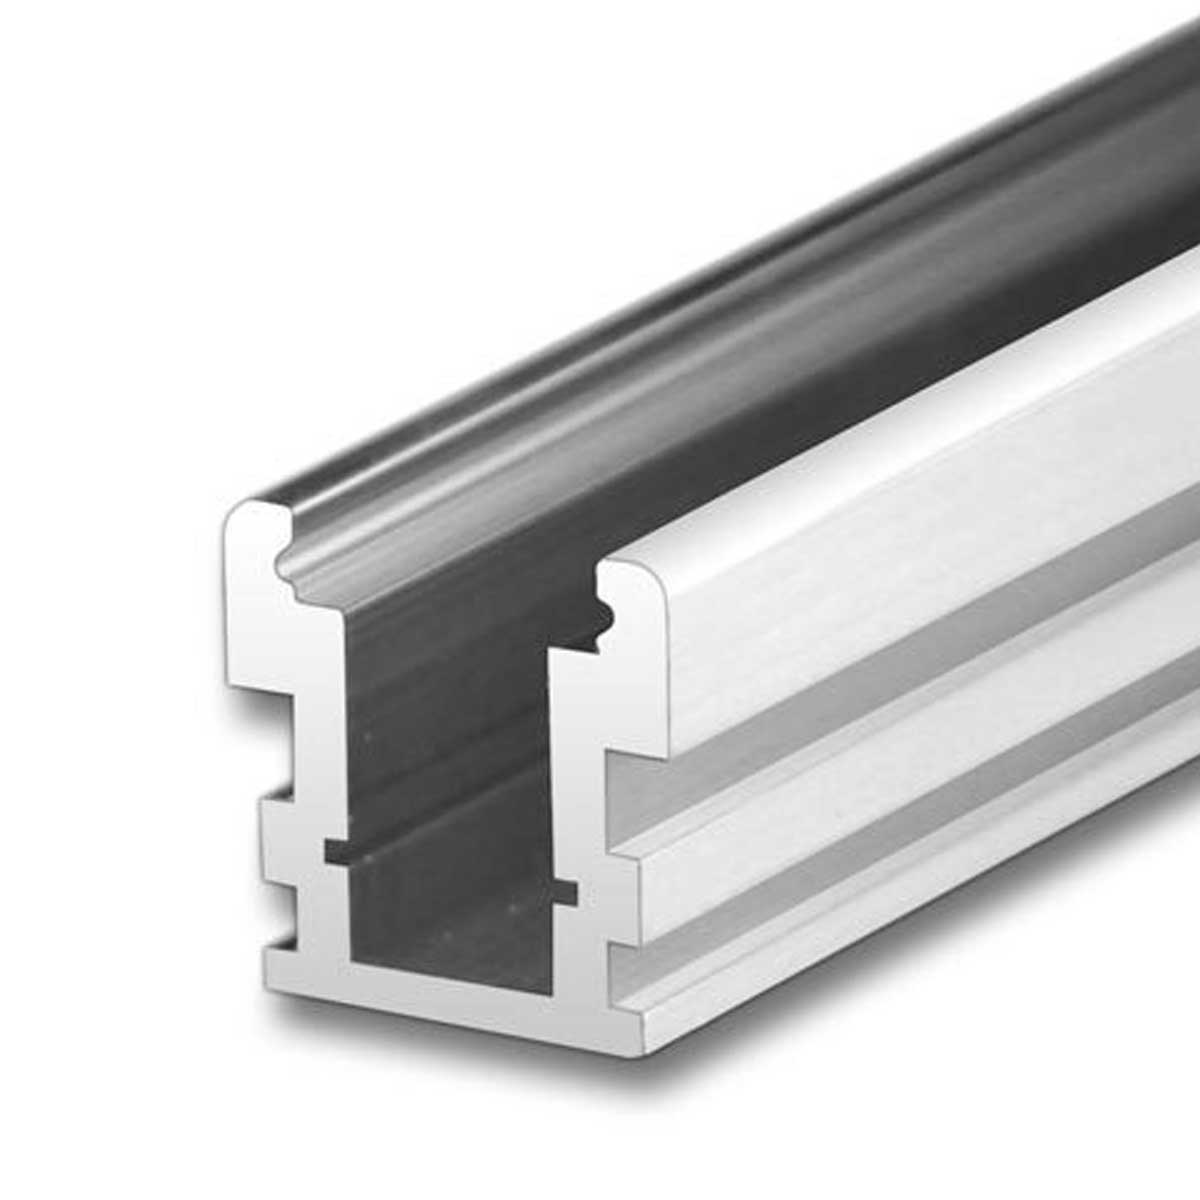 1000 Aluminium Slotted Channel Manufacturers, Suppliers in Amarkantak